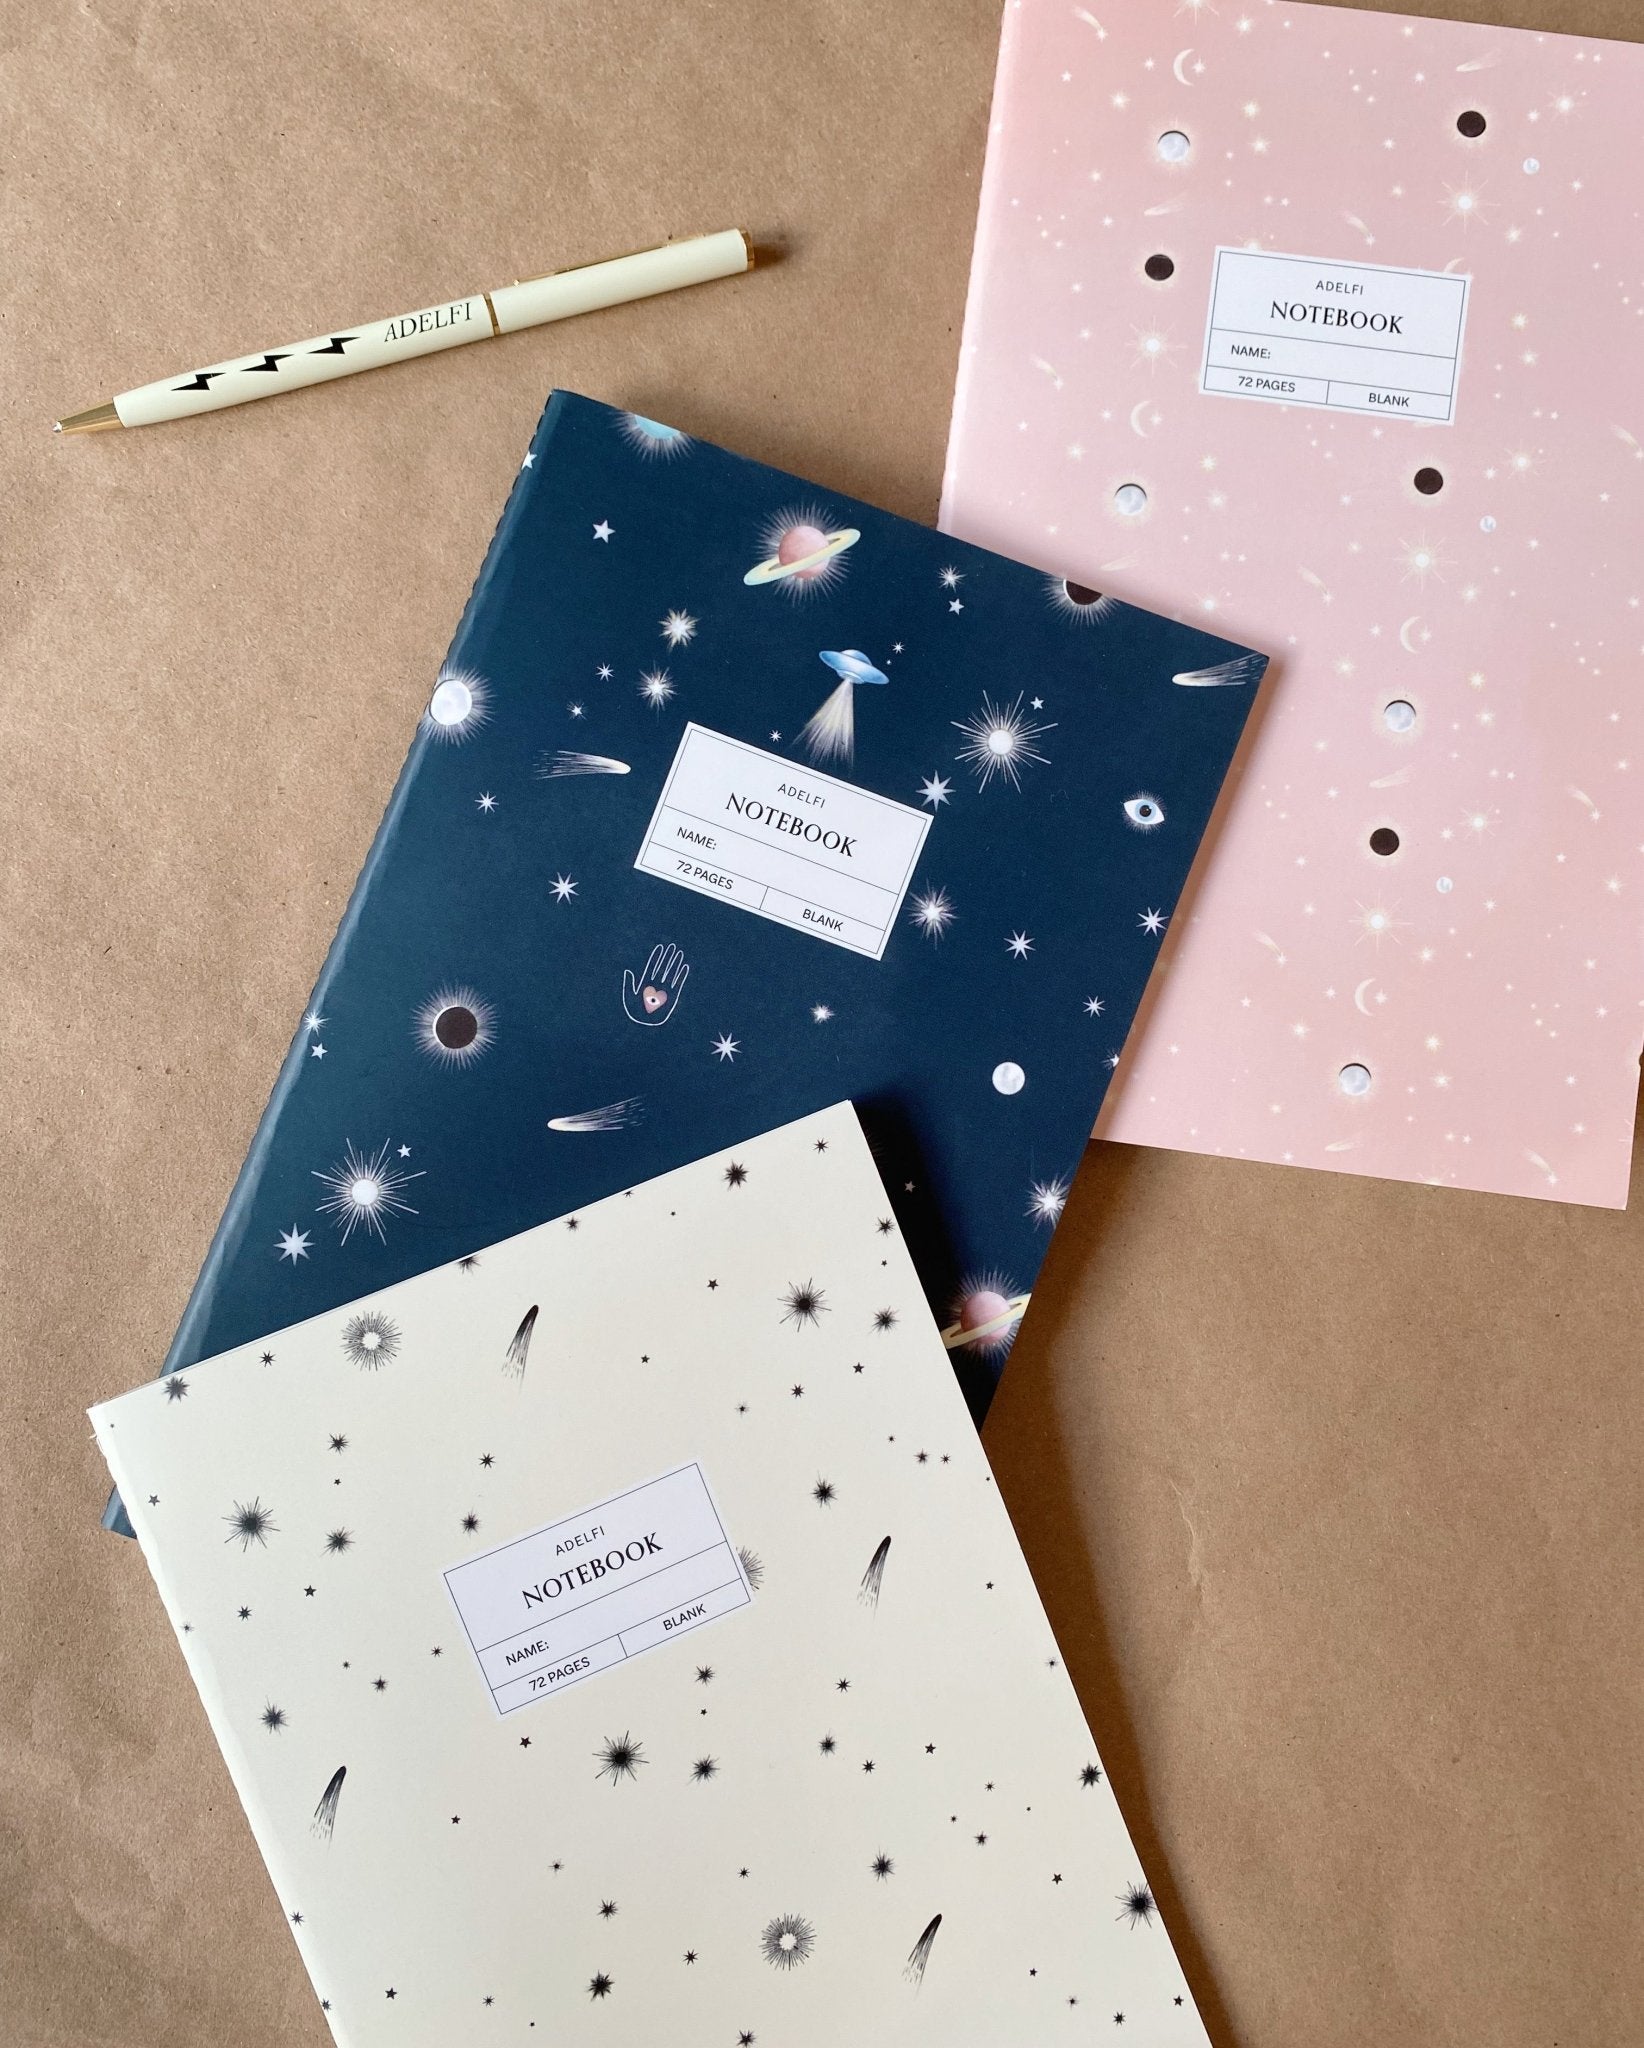 Adelfi notebook trio on a kraft paper background with an Adelfi pen. One notebook has a cream background with black stars and comets, the second is navy blue with mystical outer space icons, and the third is pink with stars and eclipsing moons.